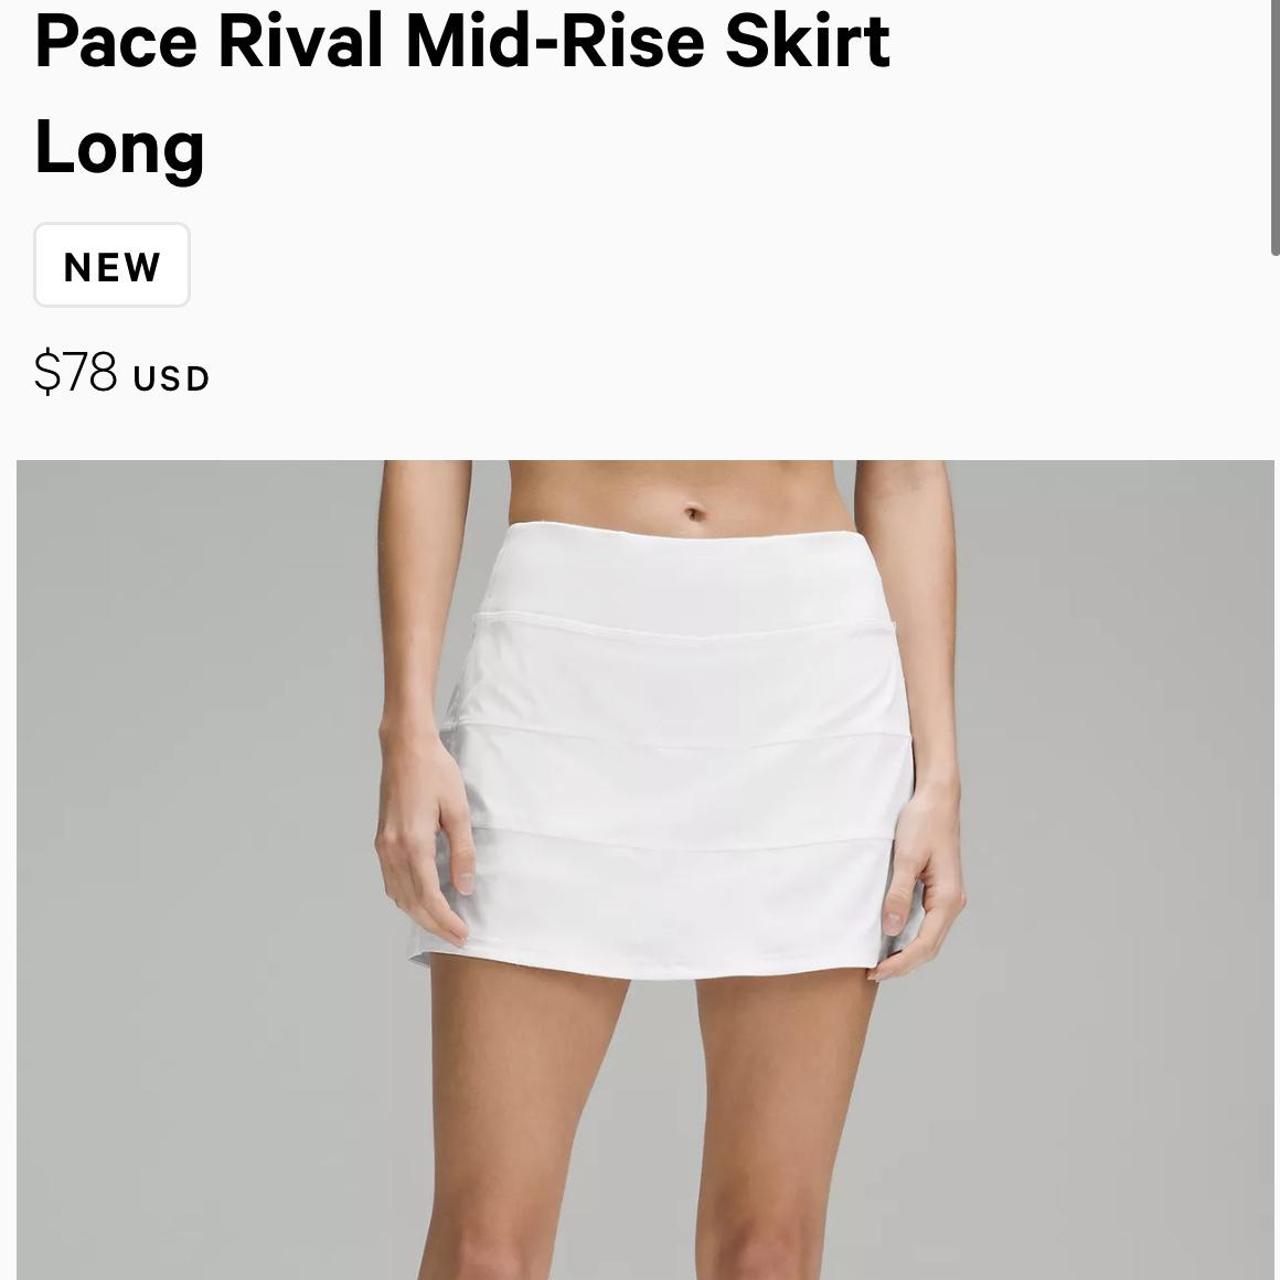 Lululemon Pace Rival mid rise skirt 🪩 it's not the - Depop